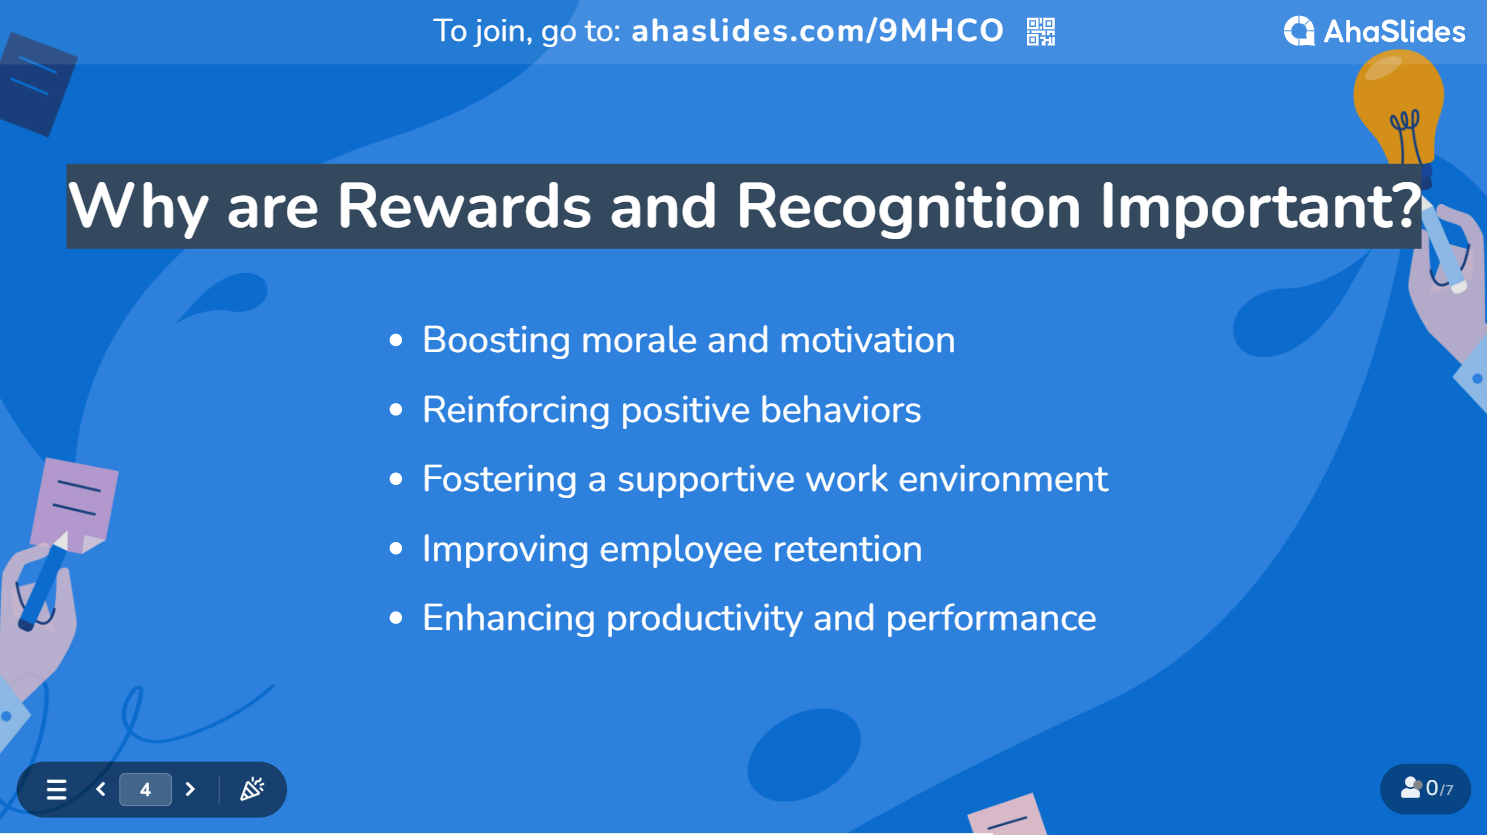 Rewards and Recognition meaning